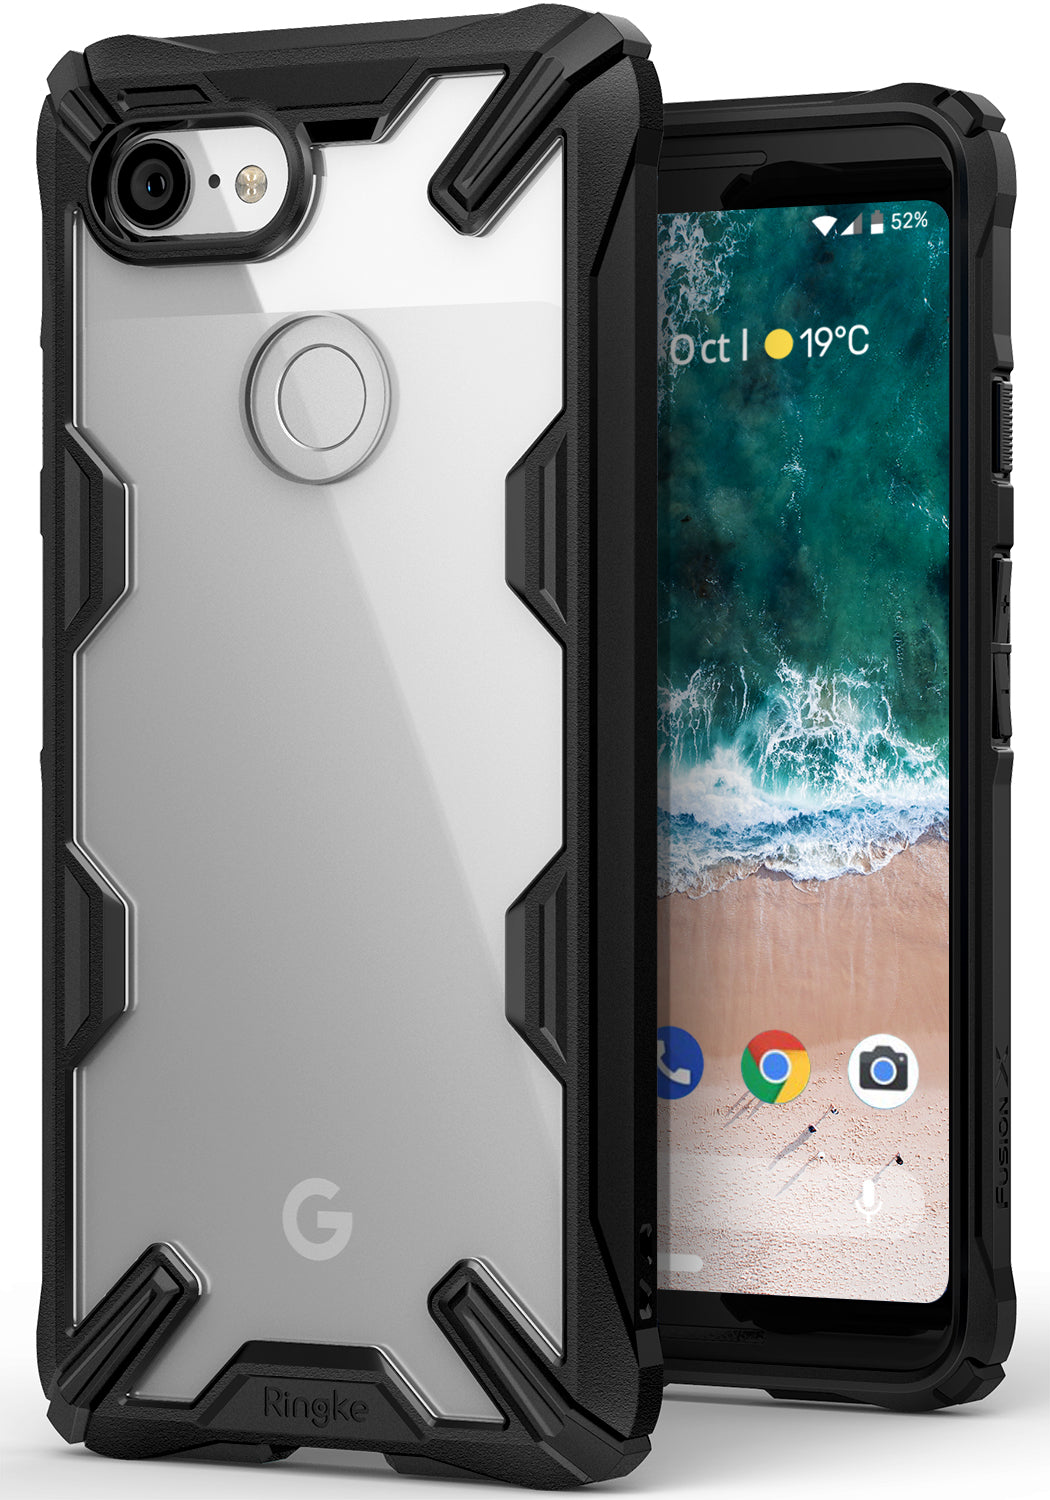 ringke fusion-x rugged heavy duty clear back case cover for google pixel 3 main black